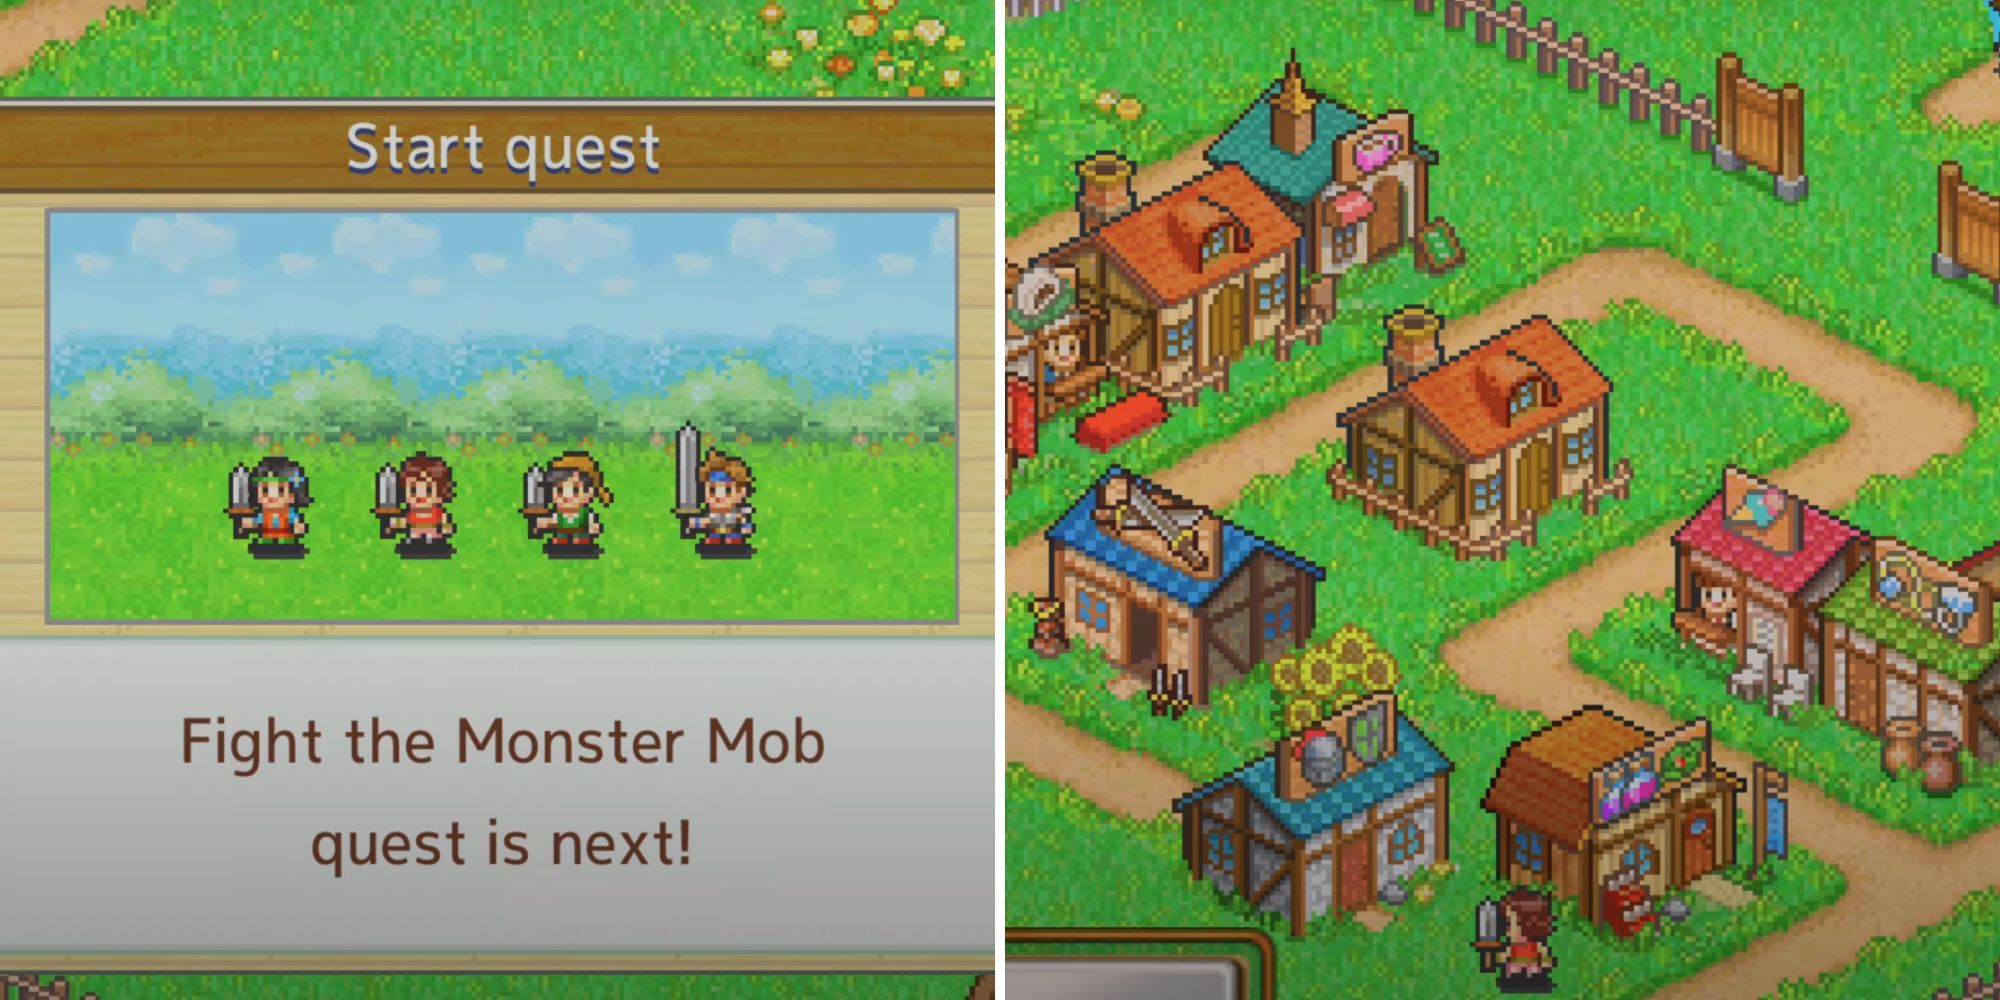 A split image of a four-person party of pixelated adventurers, and an isometric view of a pixelated village.